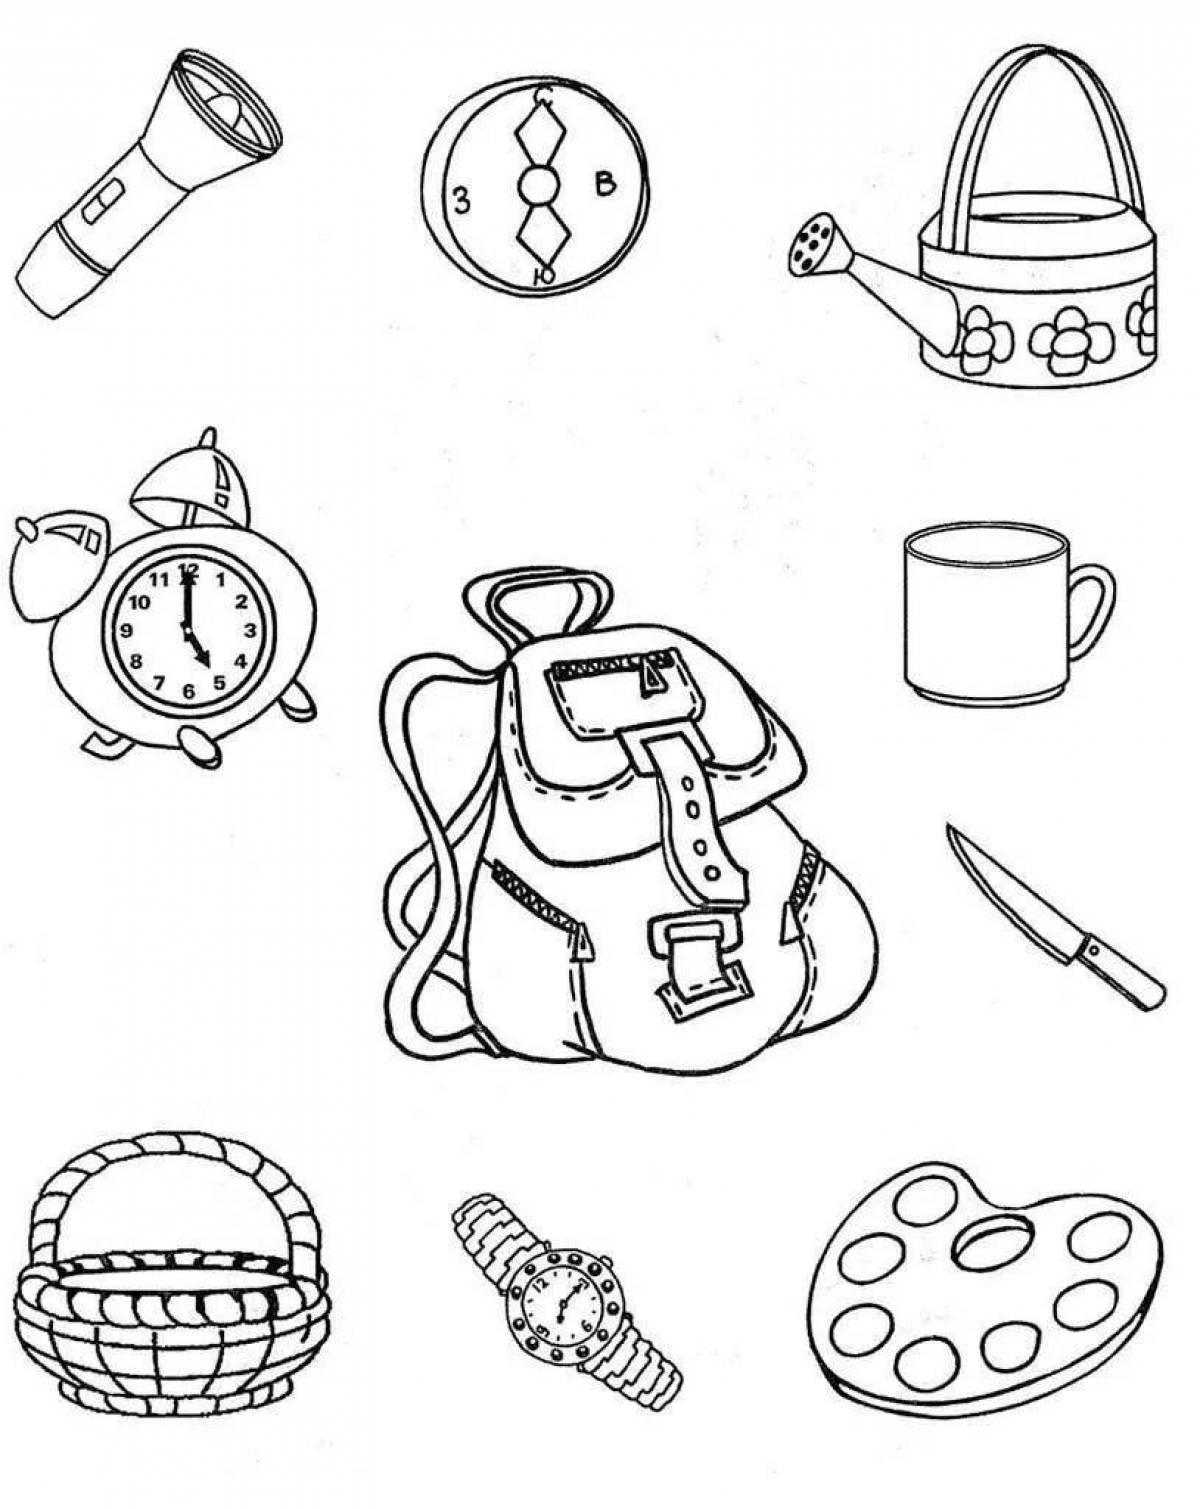 Coloured coloring pages for children